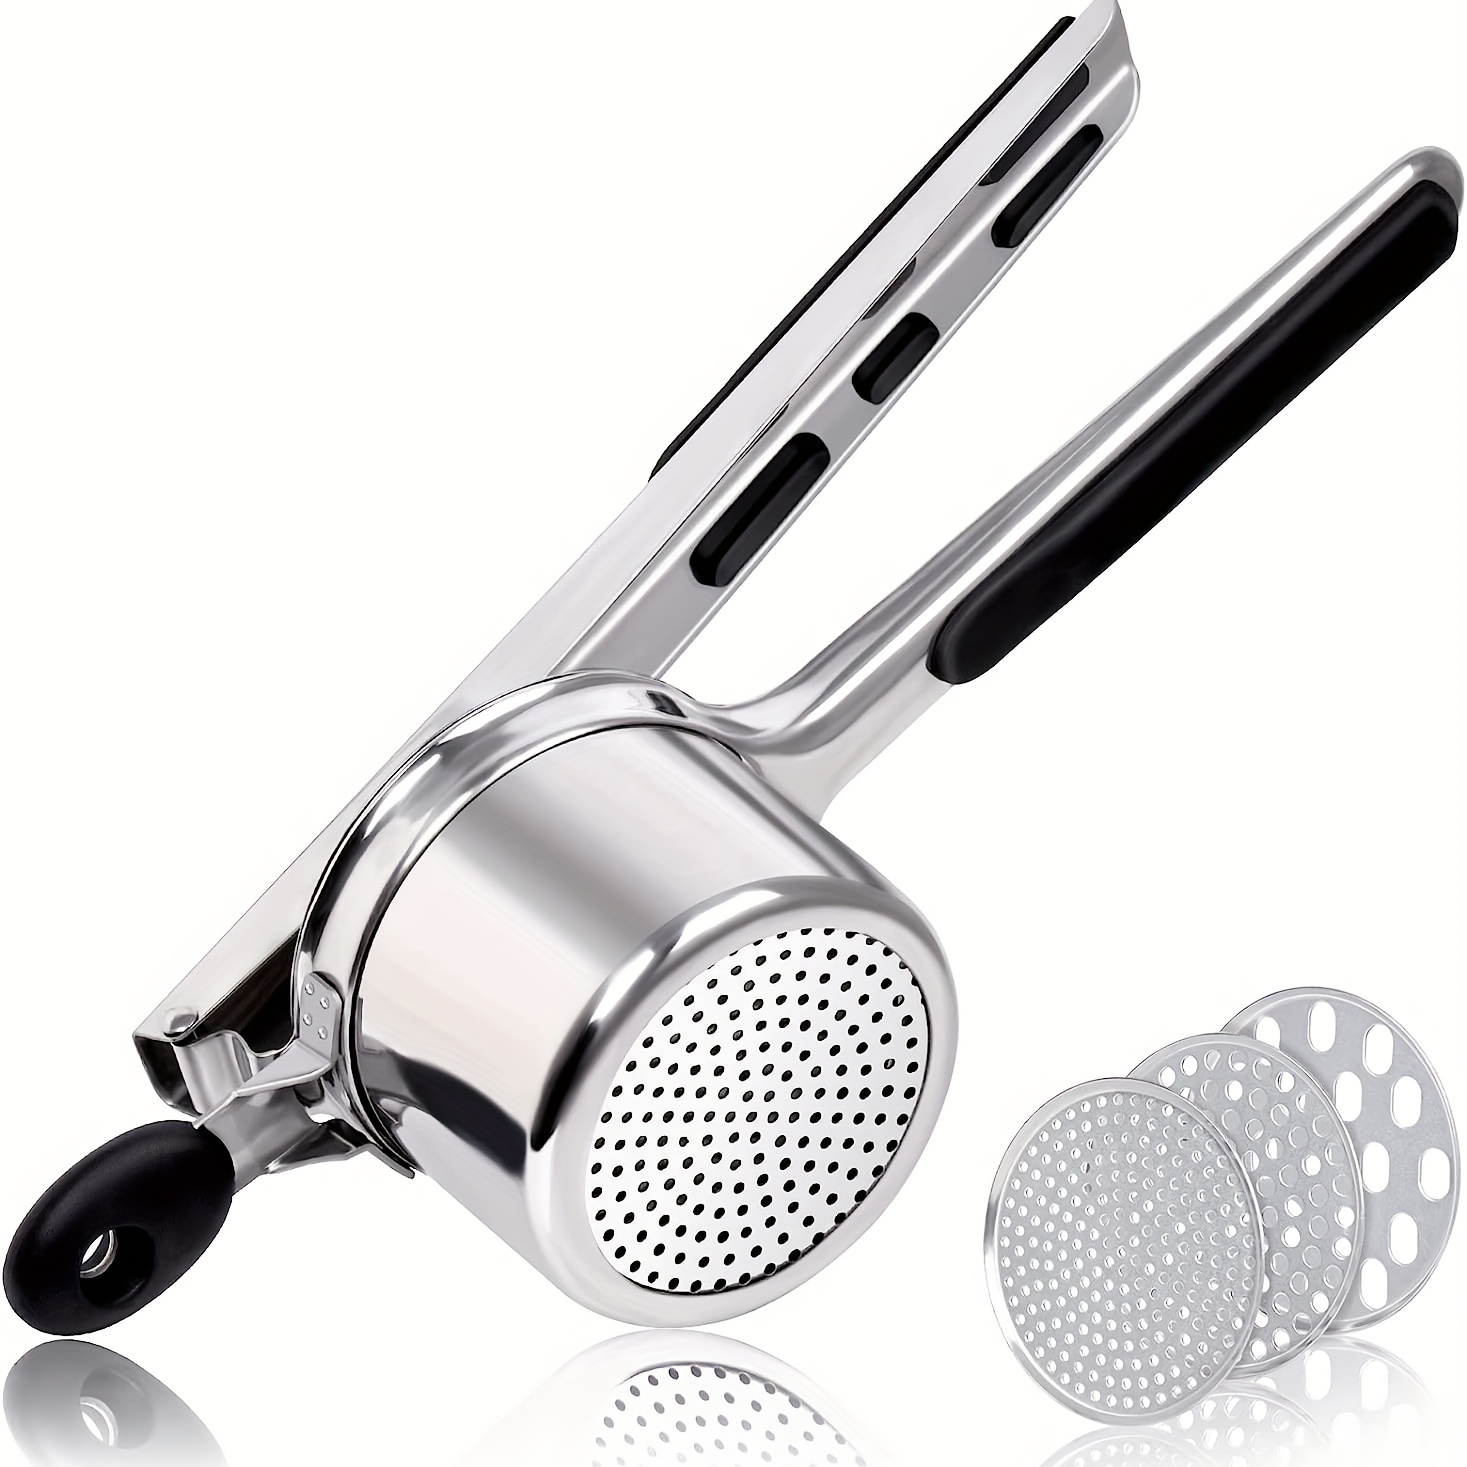 Farberware Potato Ricer Masher with 2 Removable Plates Disks